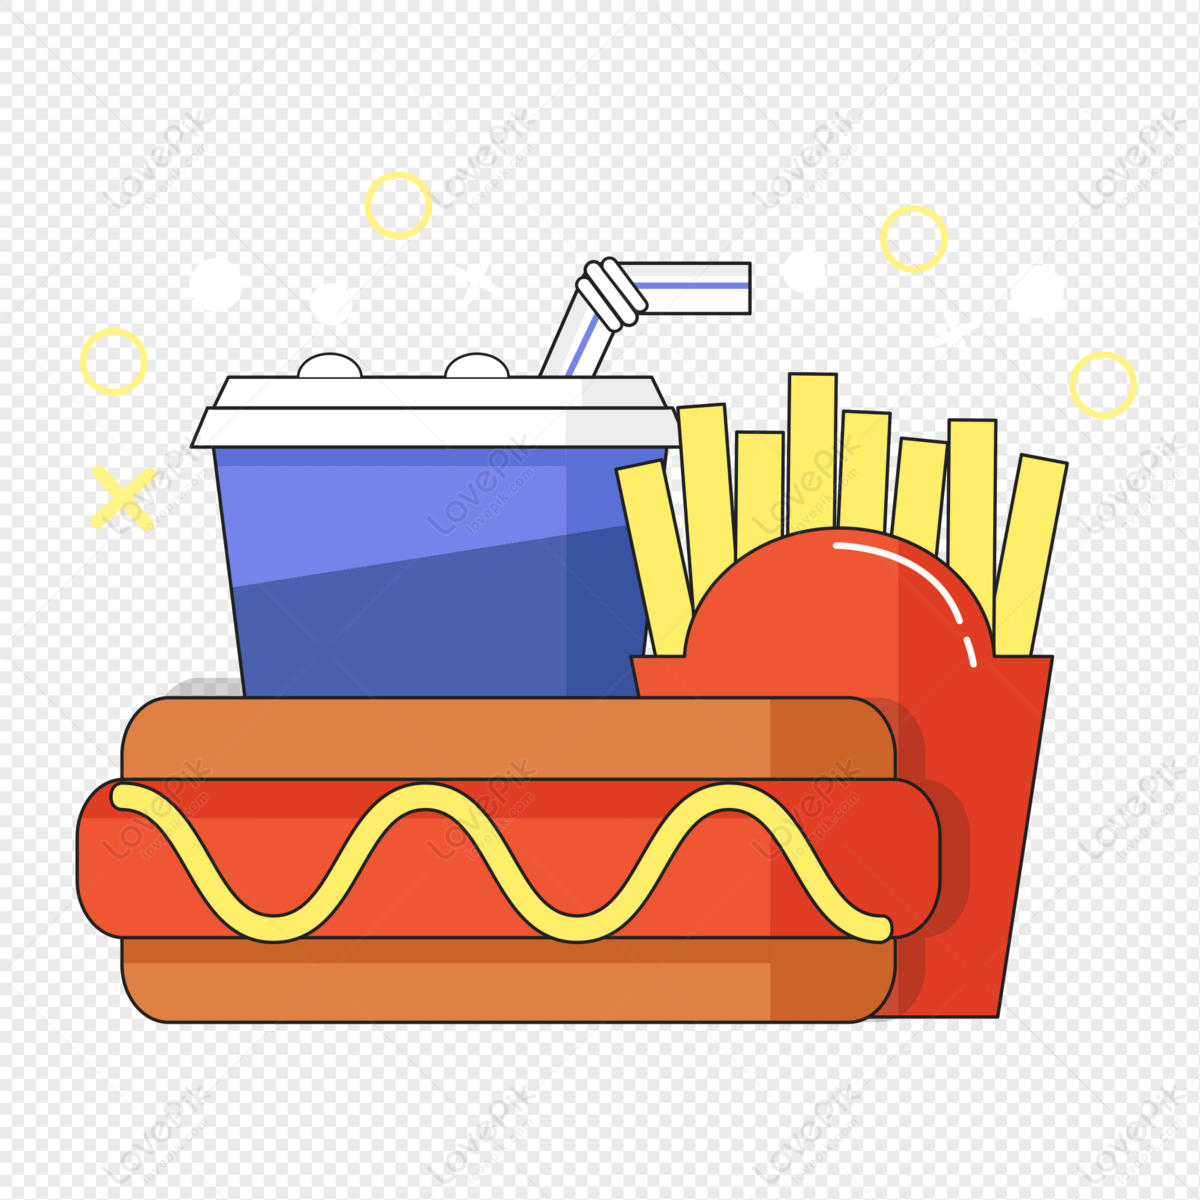 food supply clipart